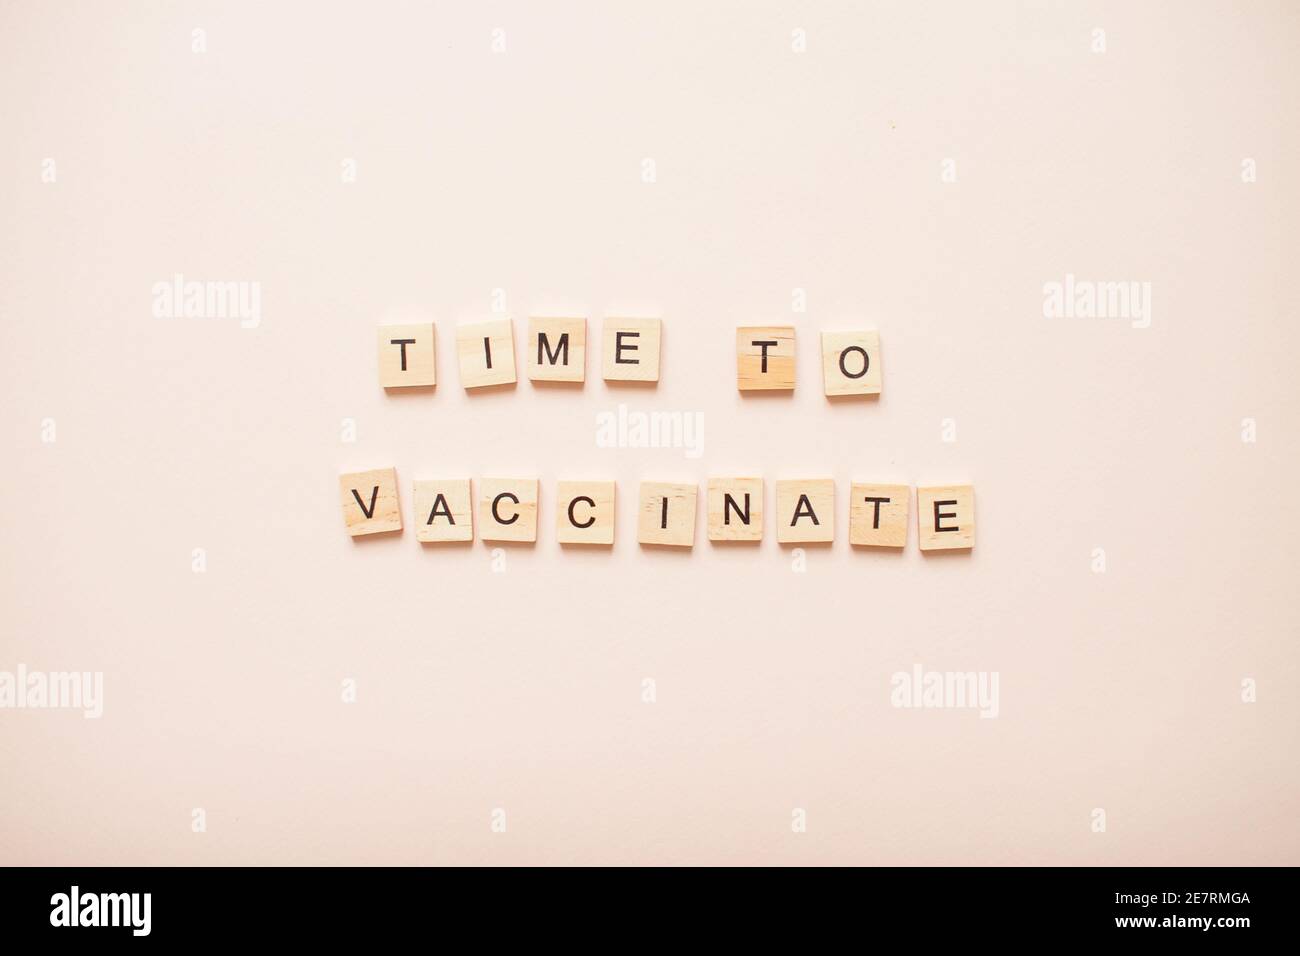 Phrase time to vaccinate made from wooden blocks on a light pink background Stock Photo